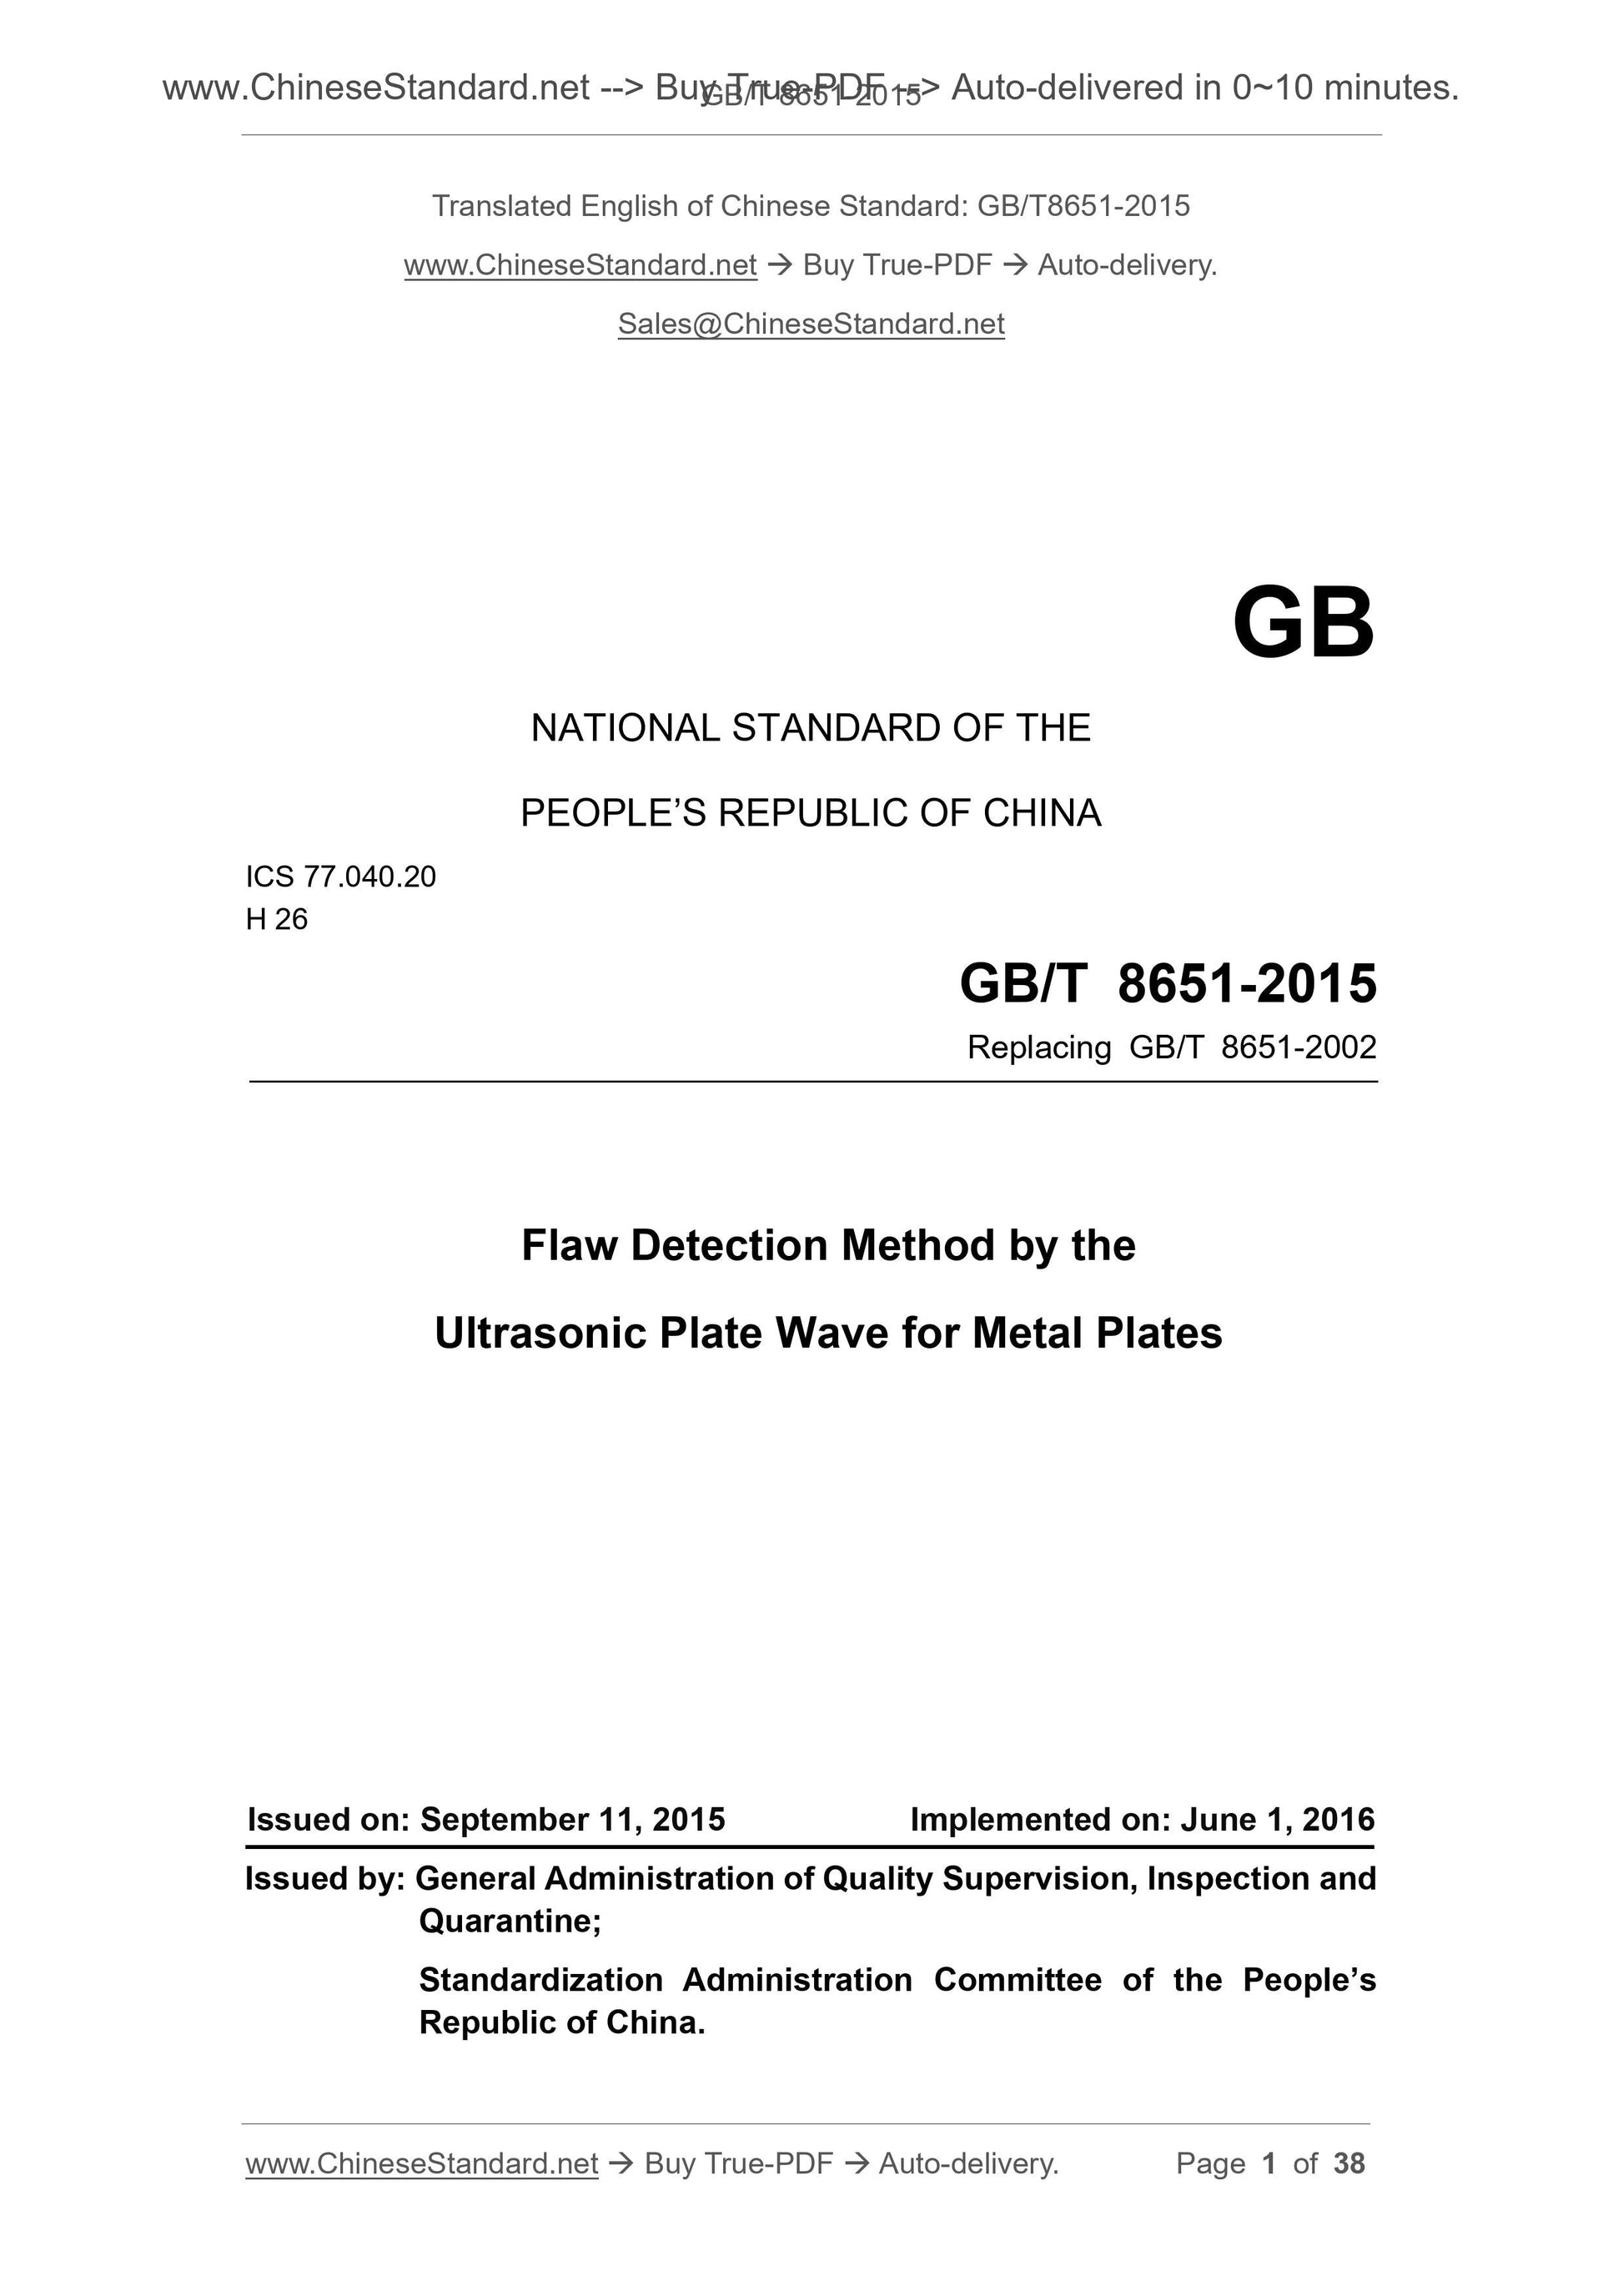 GB/T 8651-2015 Page 1